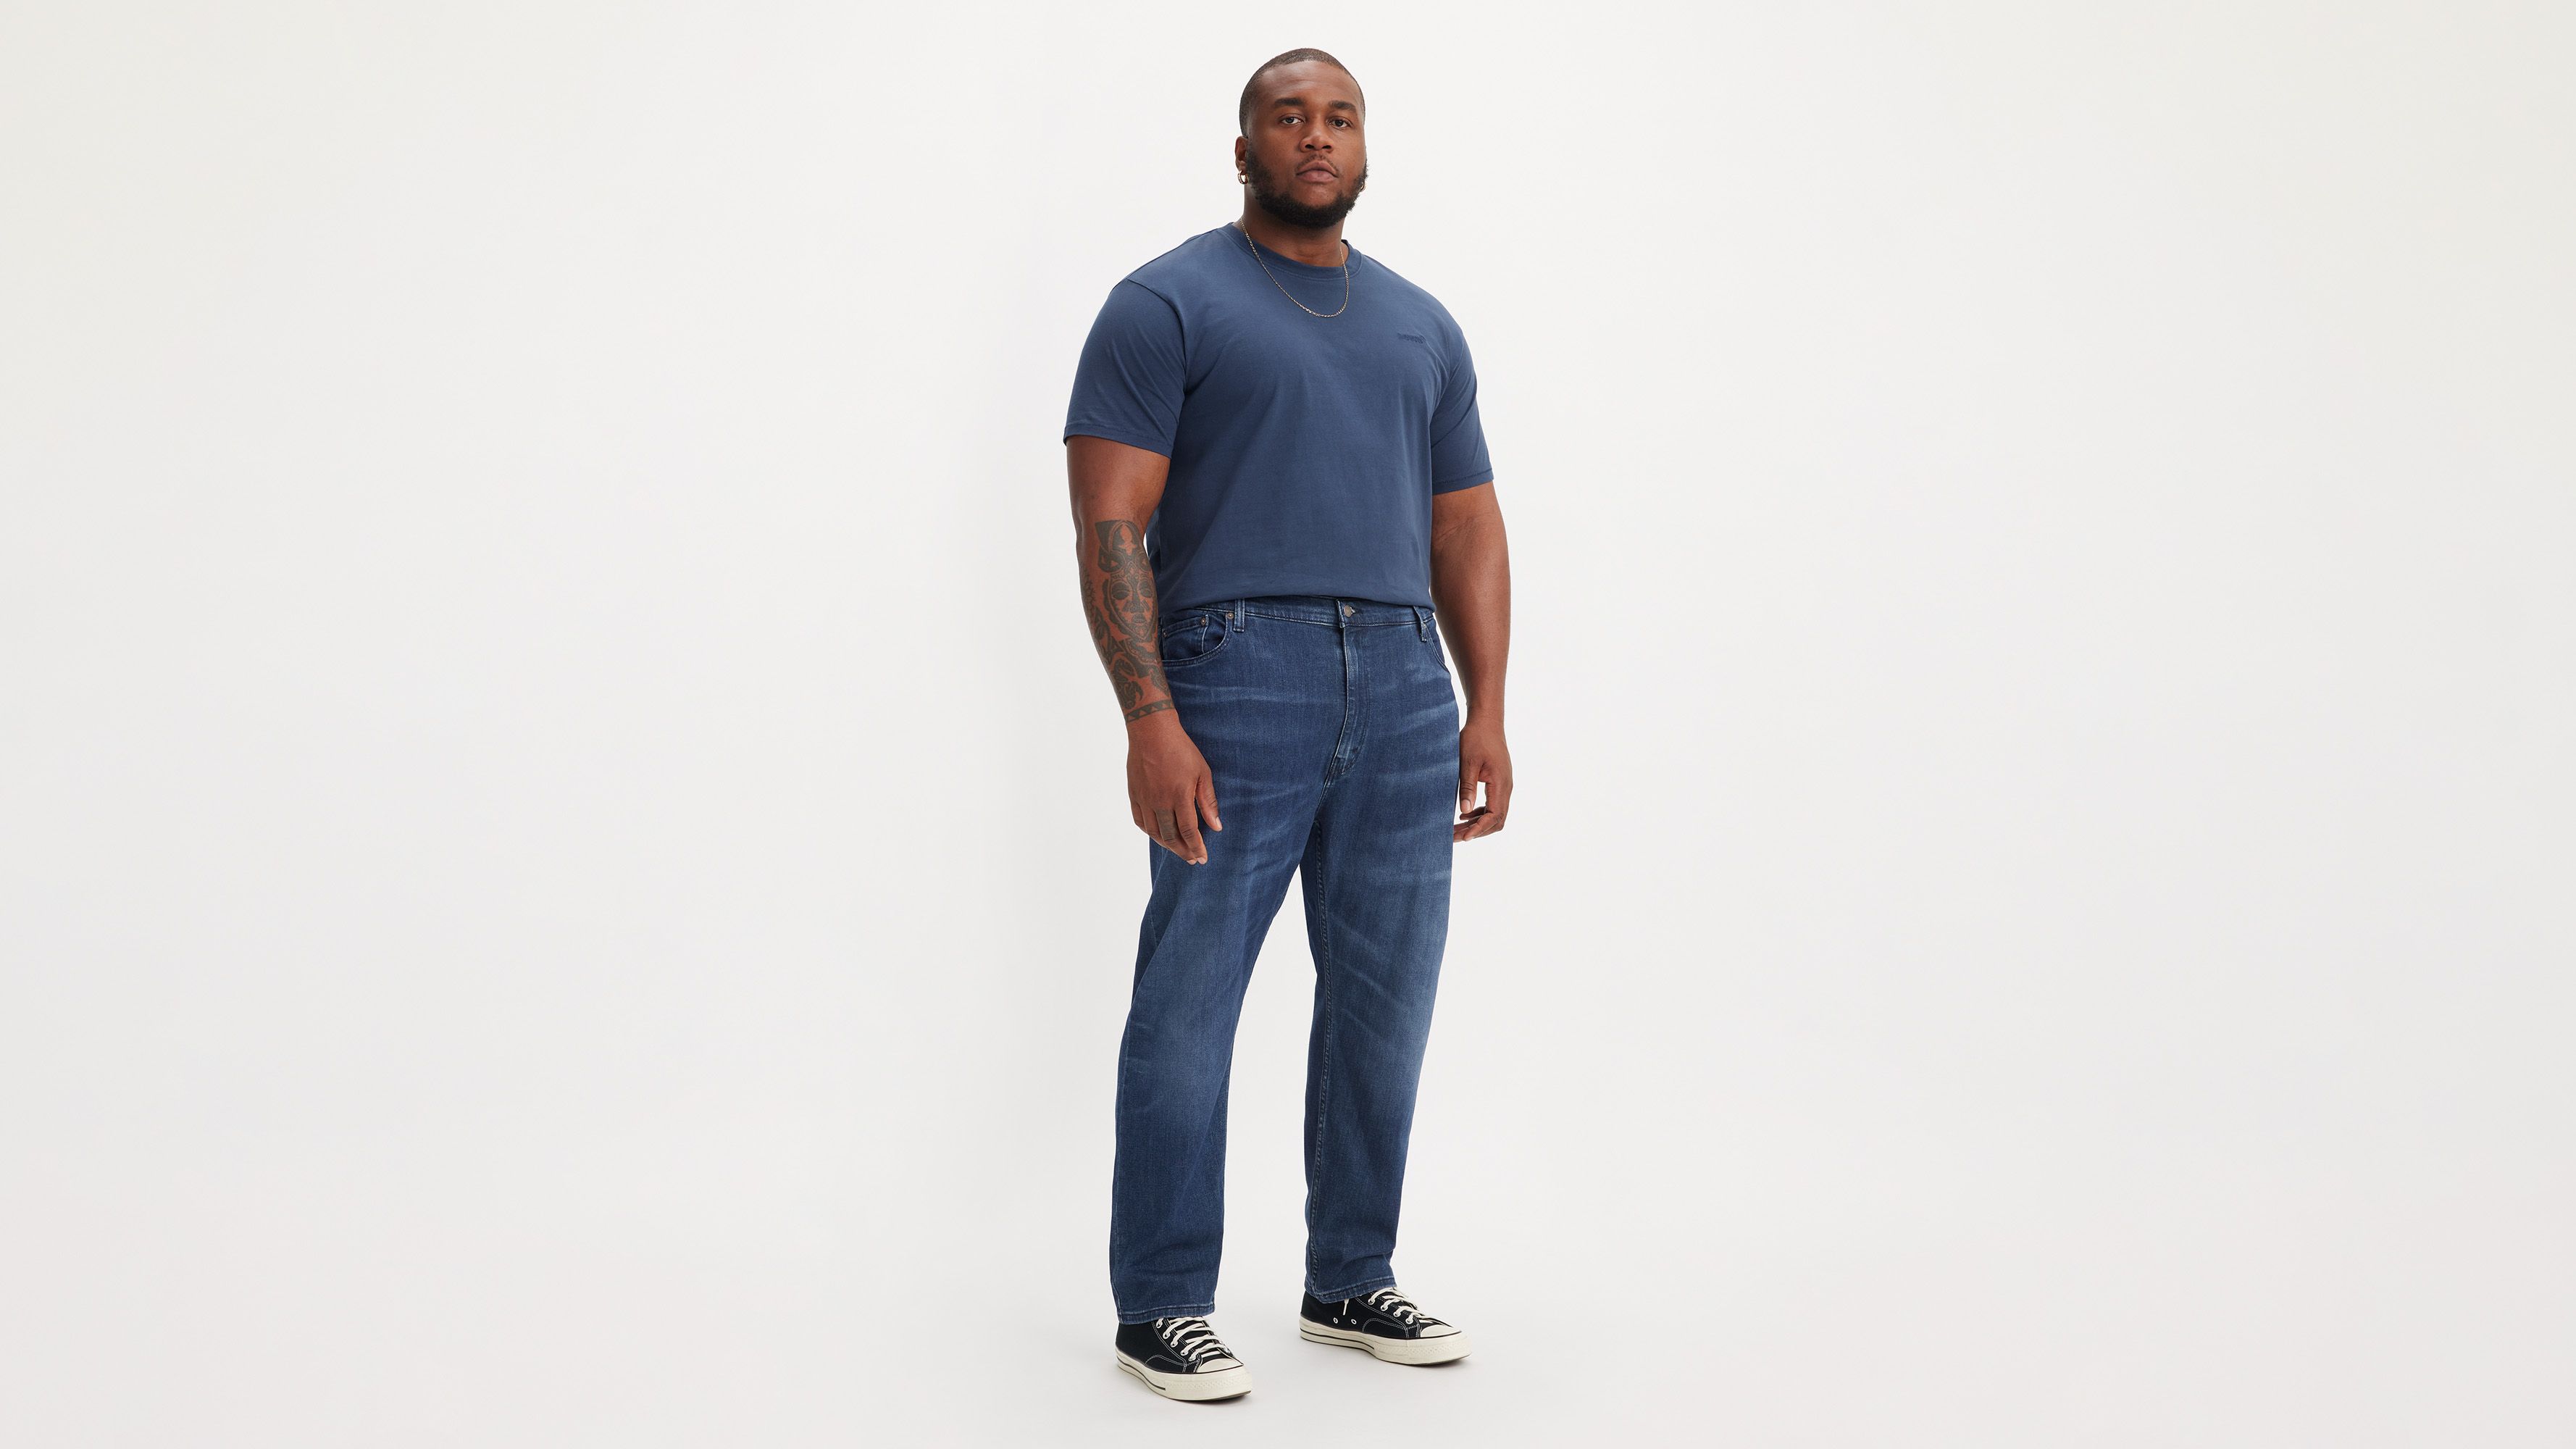 tapered jeans sale